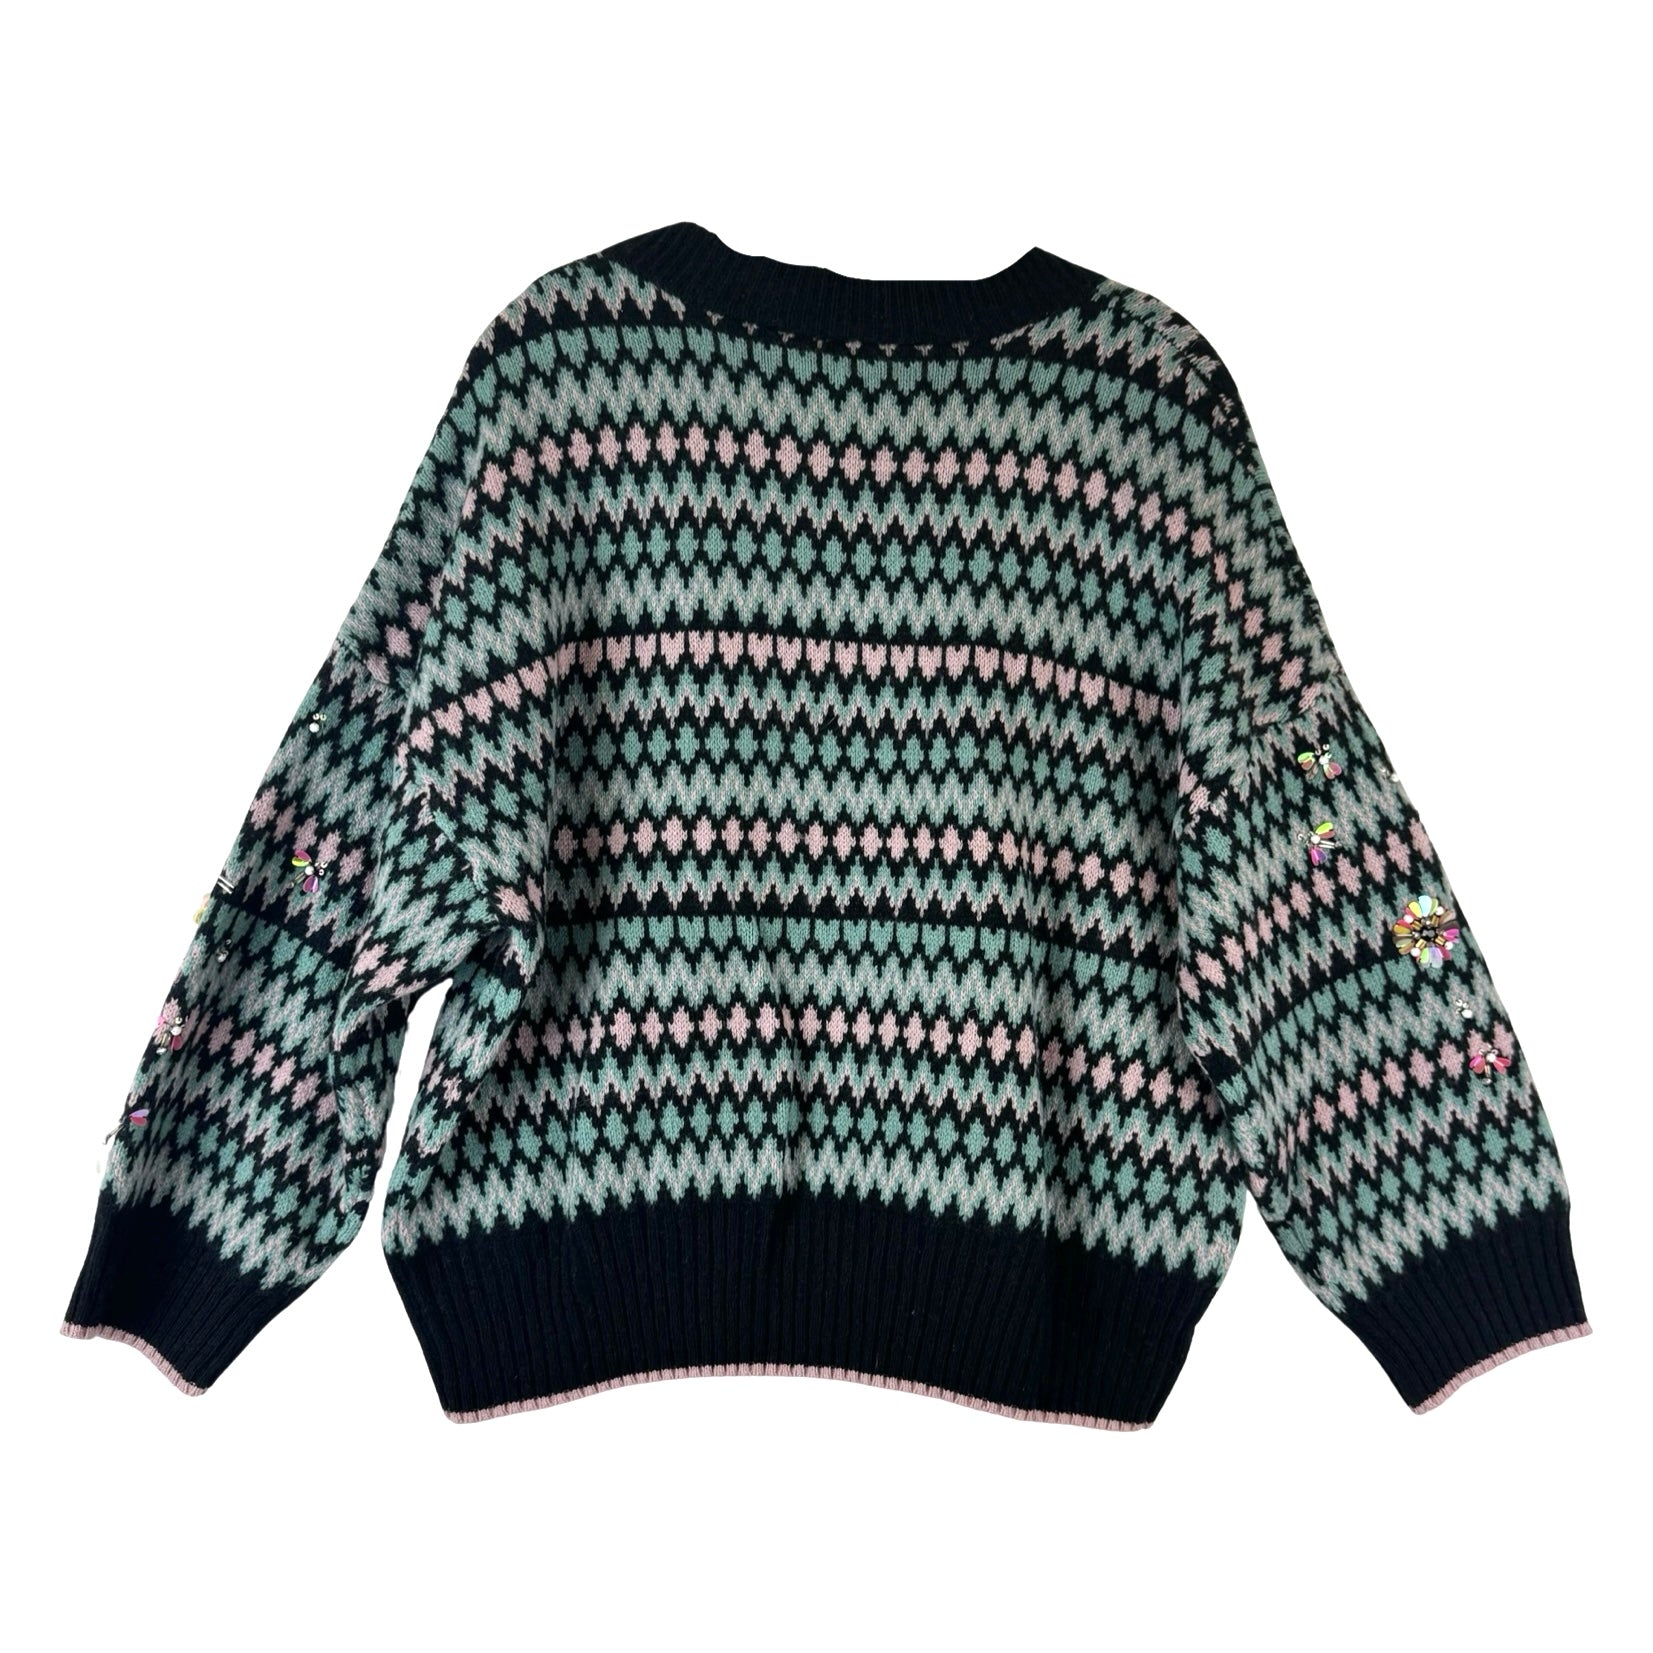 Kate Spade Sequin and Bead Embellished Fair Isle Sweater